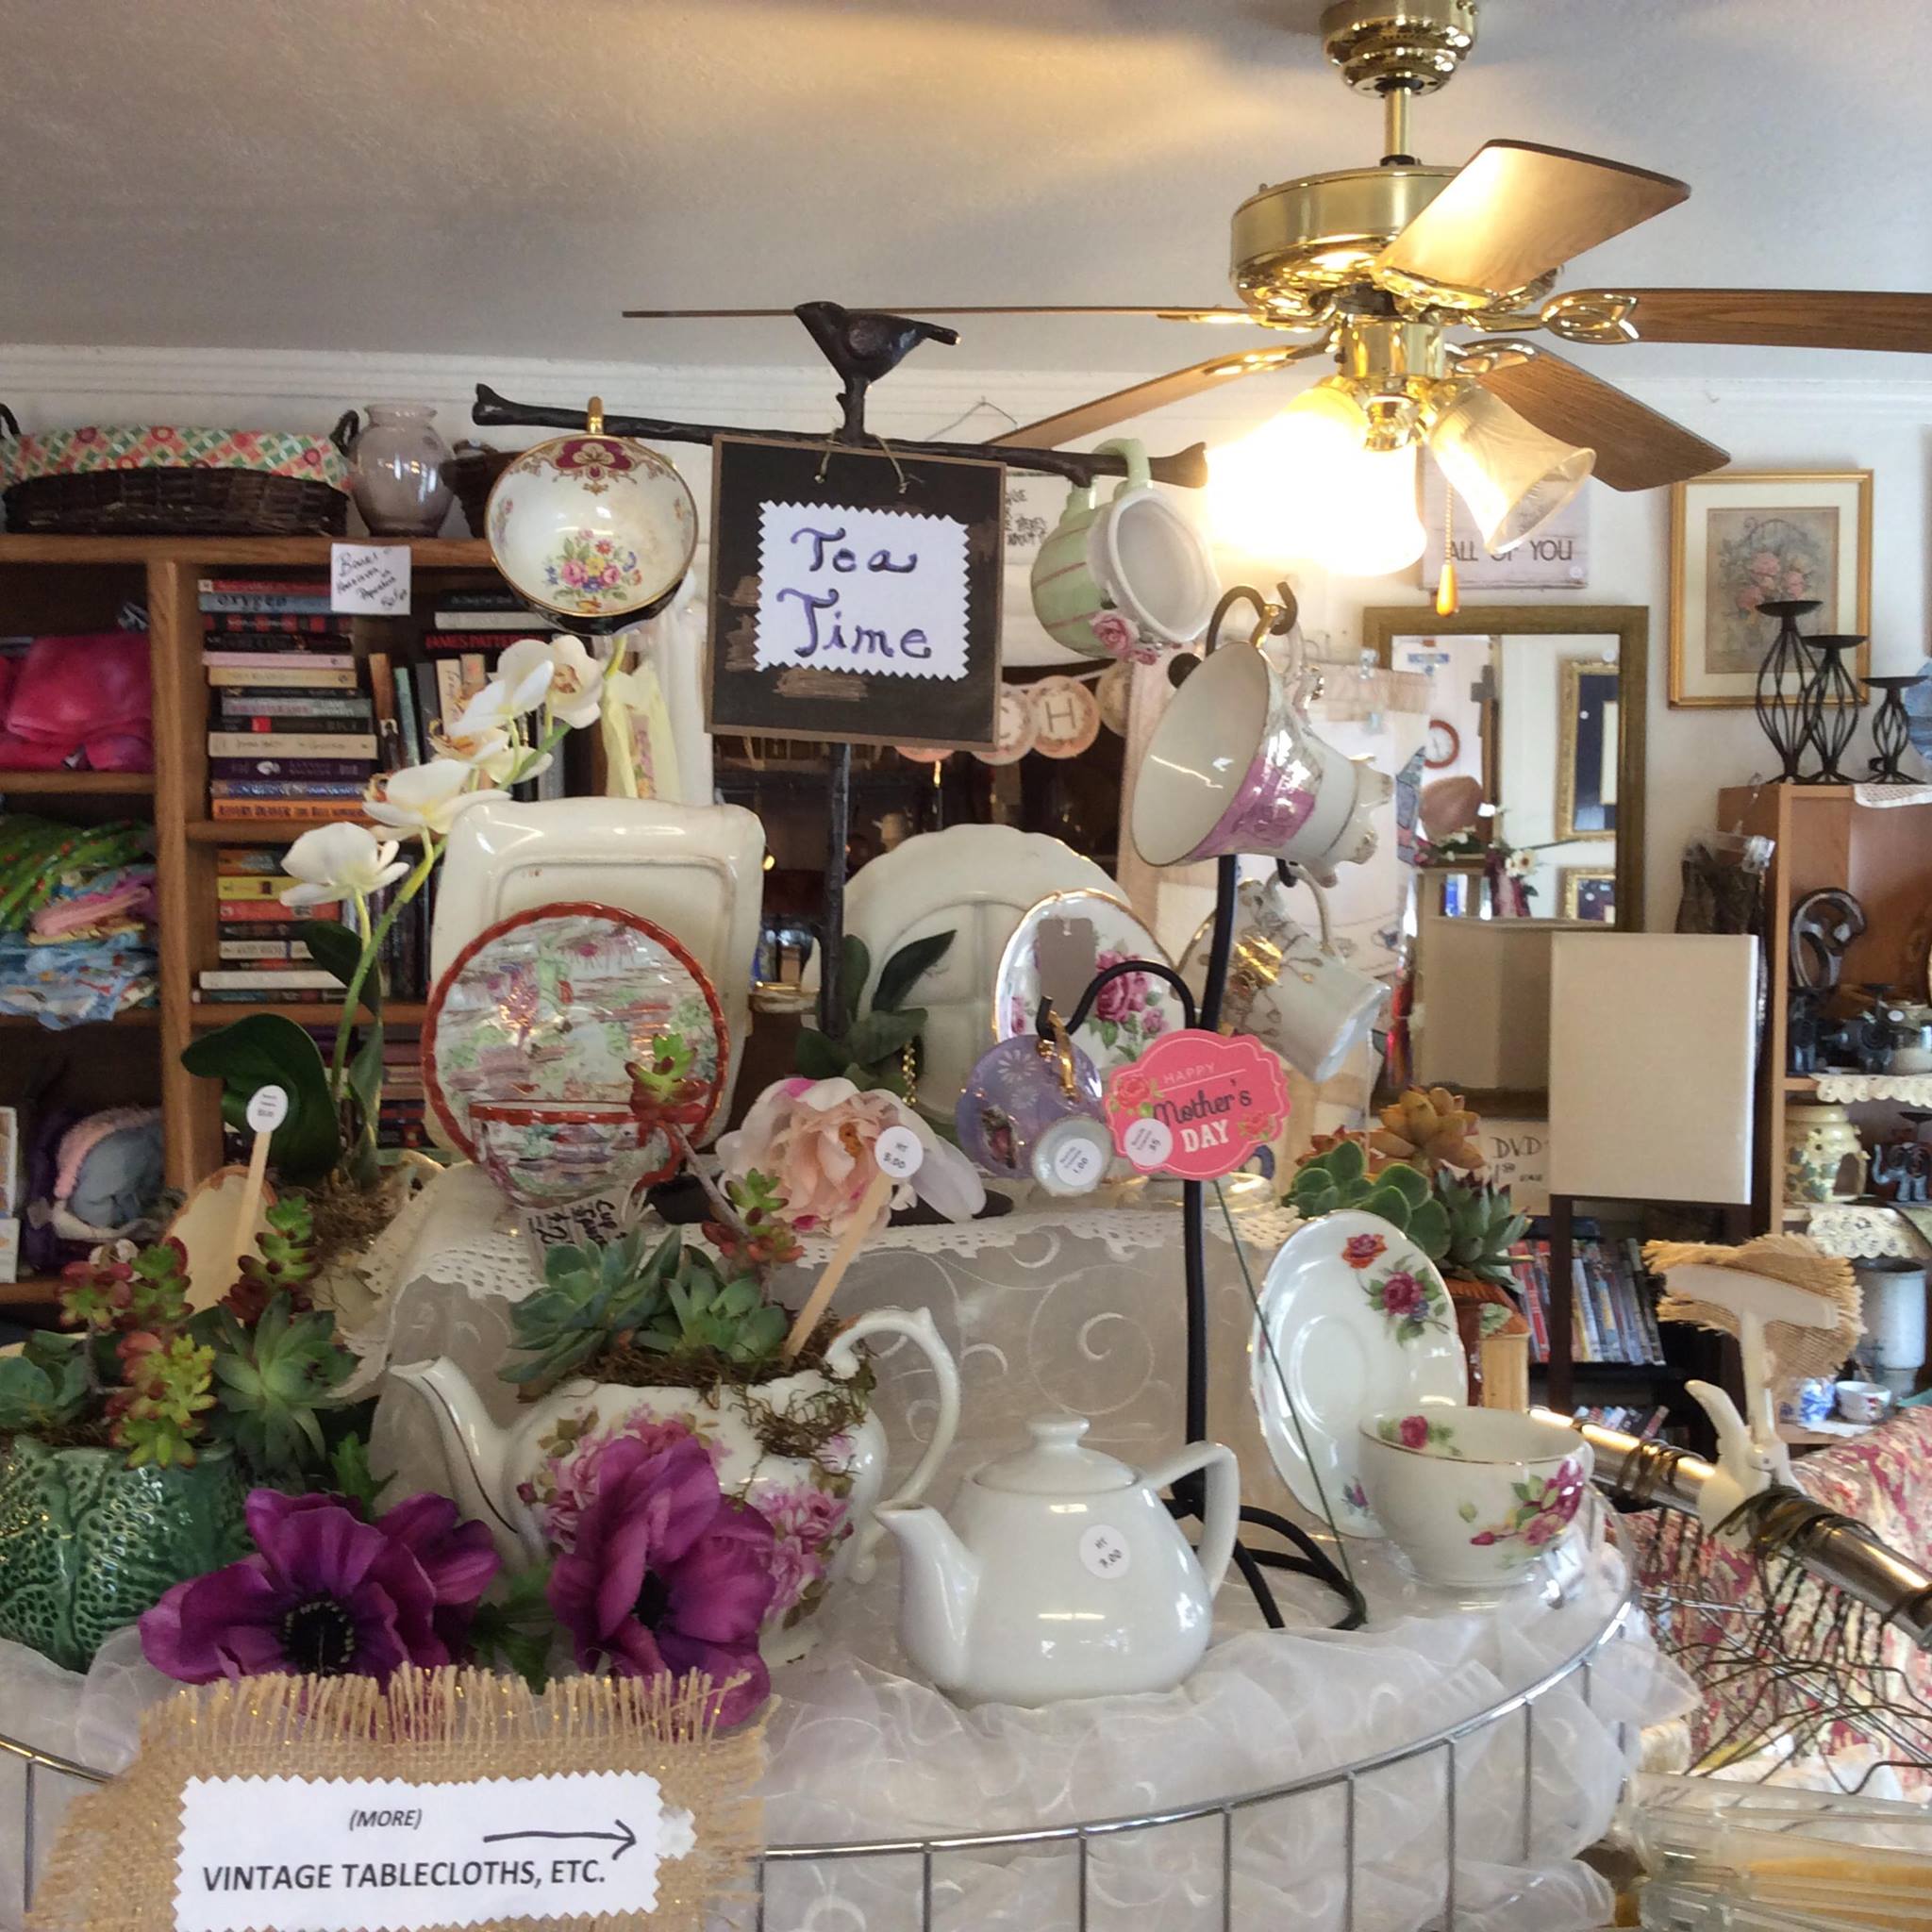 Find Unexpected Treasures At These Astoria Thrift Shops